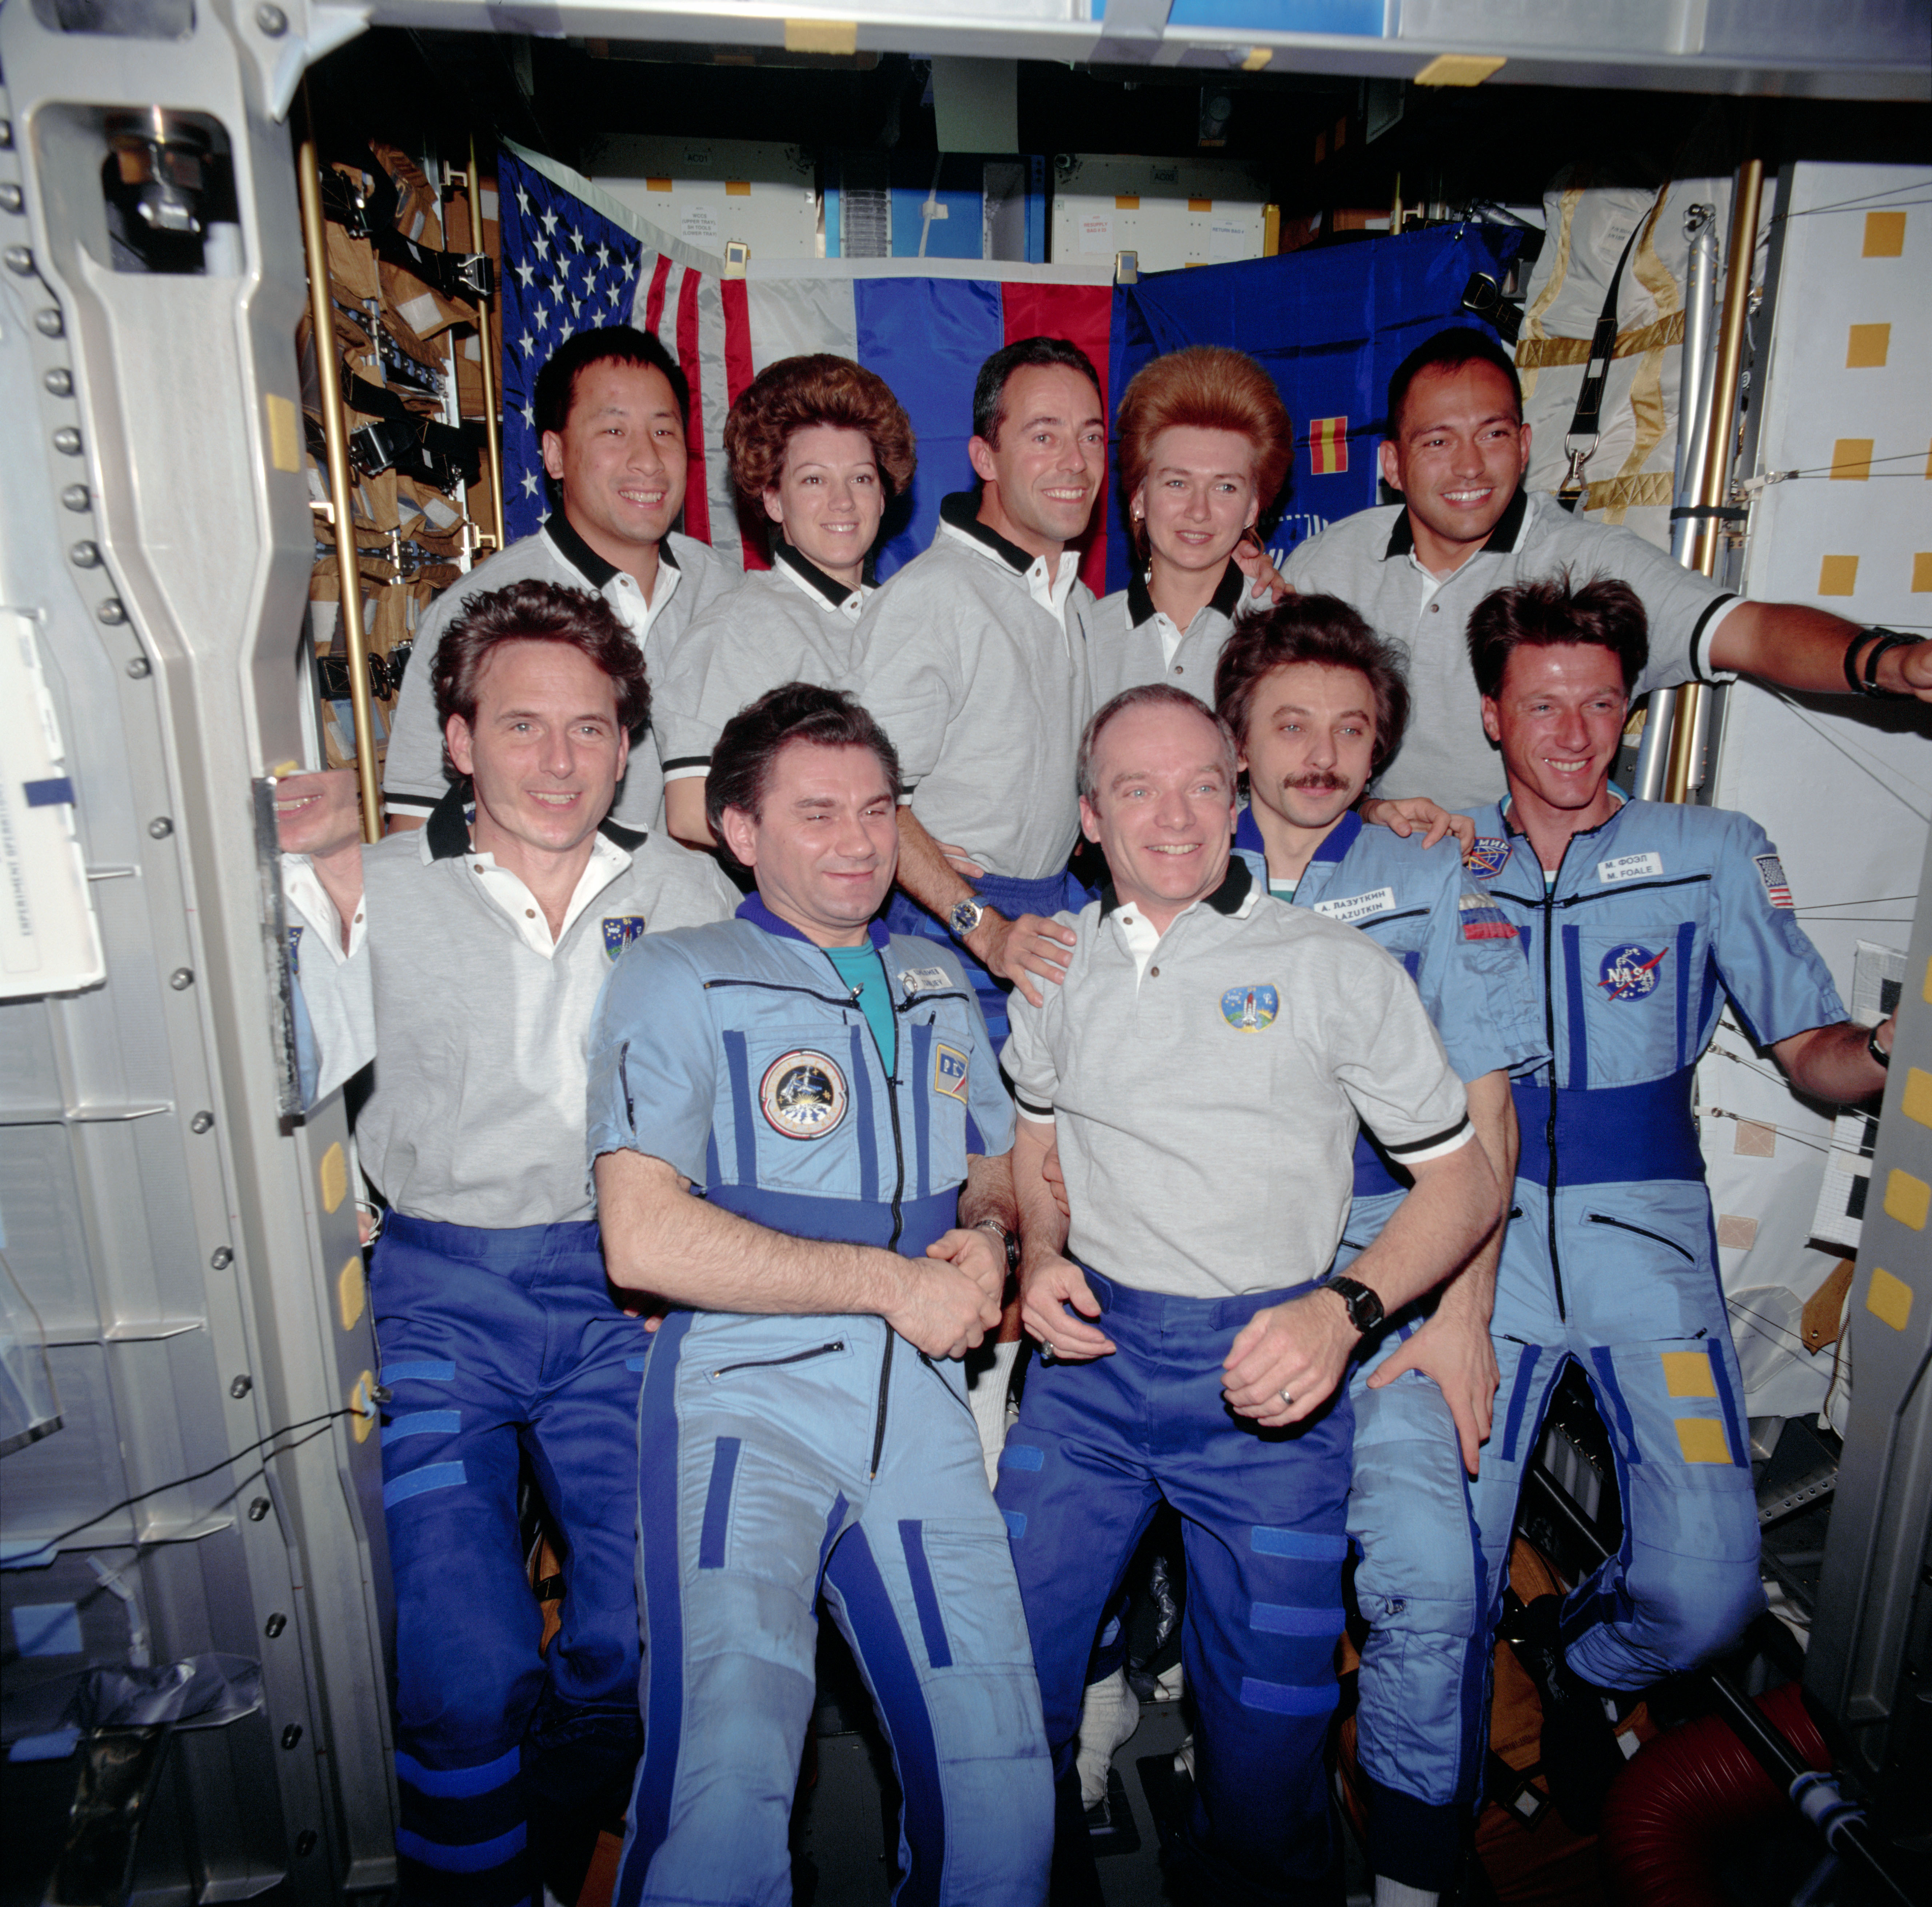 The 10 members of the STS-84 and Mir resident crew, with Noriega